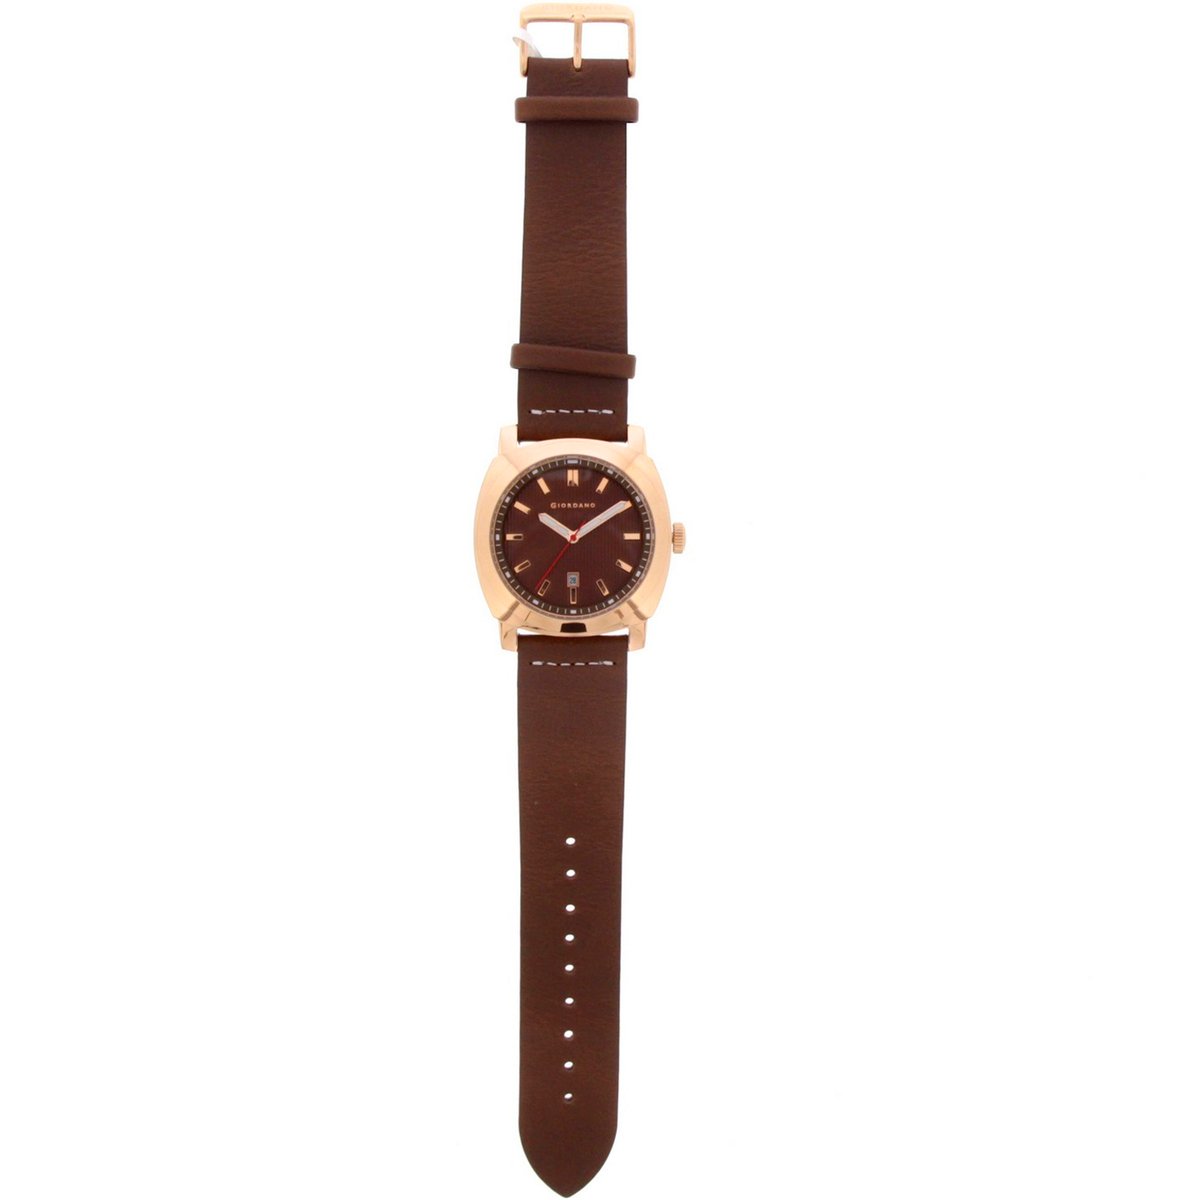 Giordano Mens Analog Watch Brown Strap With Brown Dial 1789-06